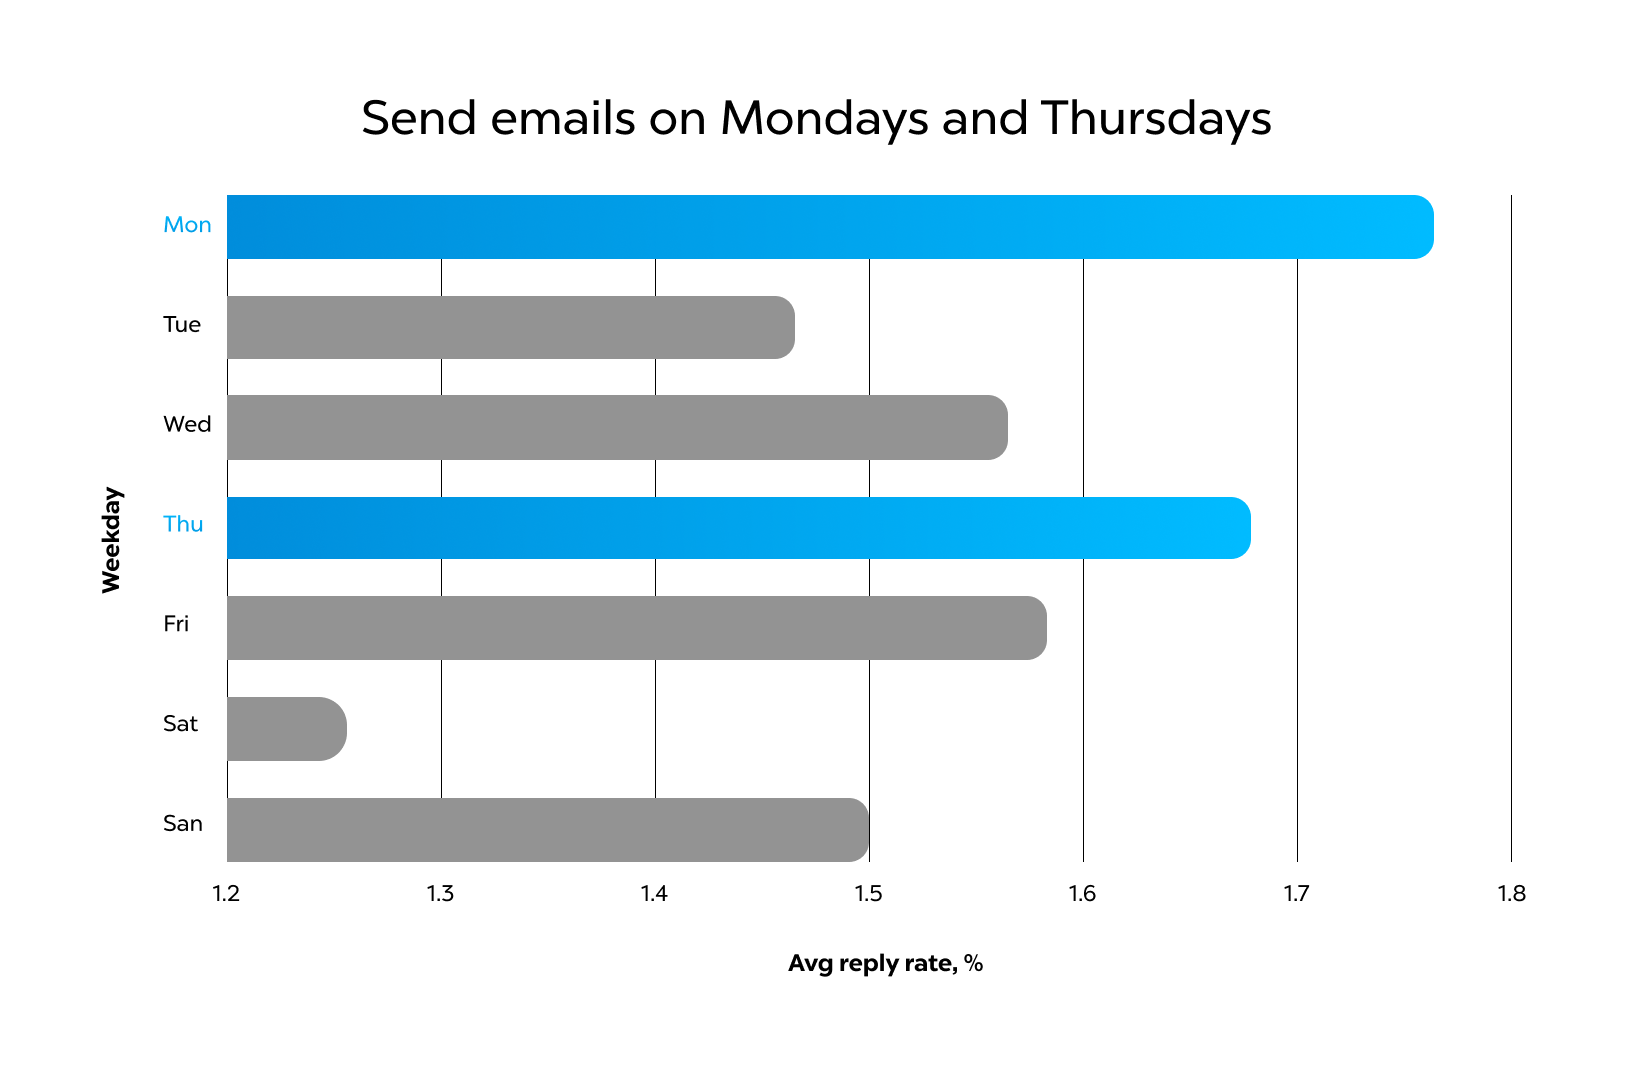 The best time to send emails